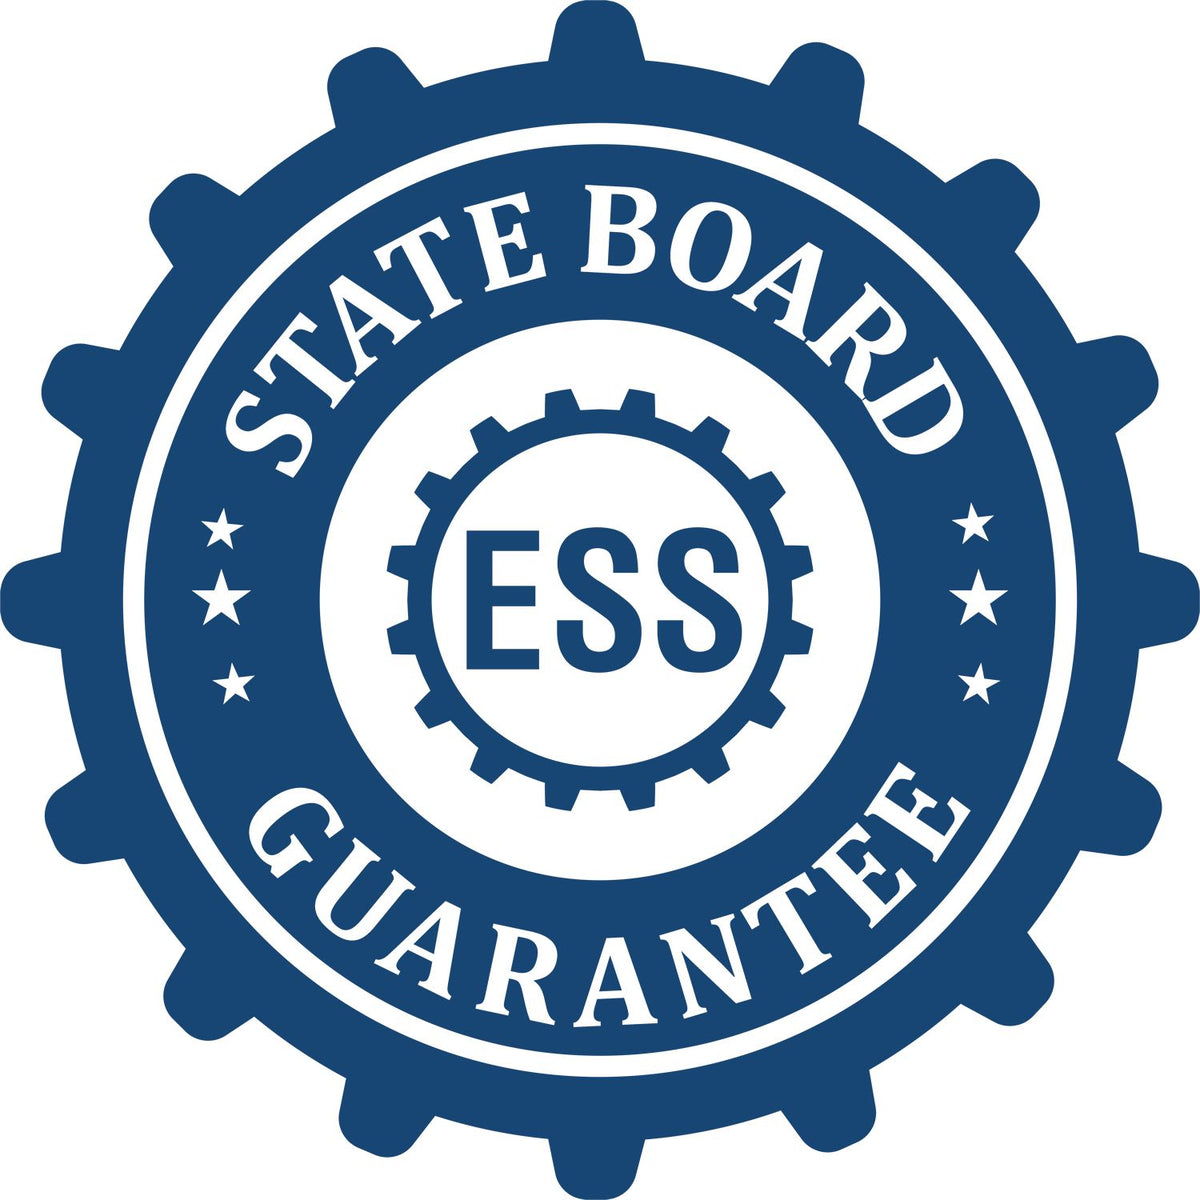 An emblem in a gear shape illustrating a state board guarantee for the State of Maryland Extended Long Reach Engineer Seal product.